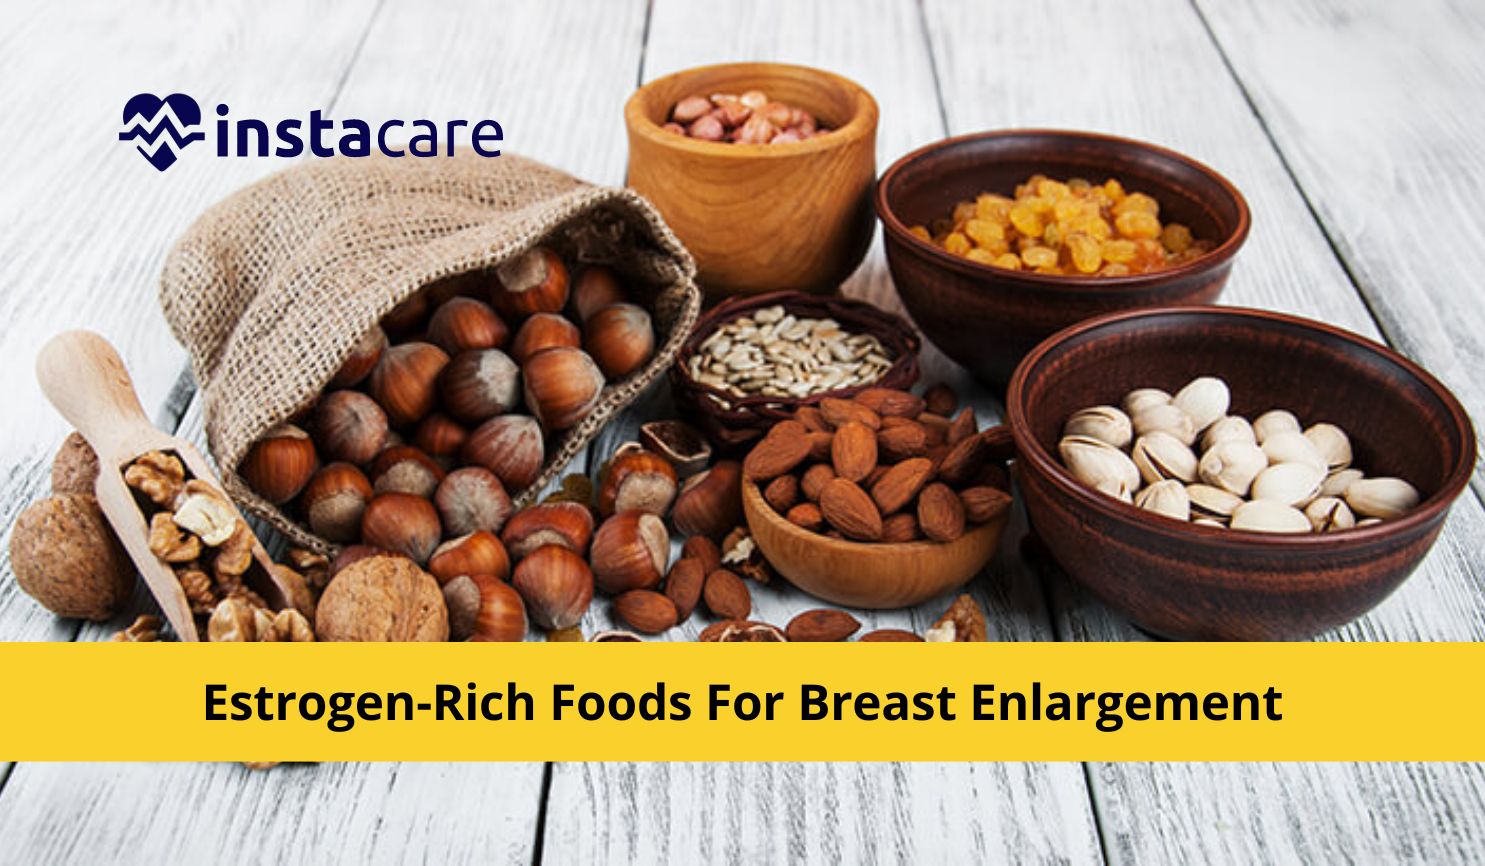 Picture of Estrogen-Rich Foods For Breast Enlargement What to Eat for Bigger Breast